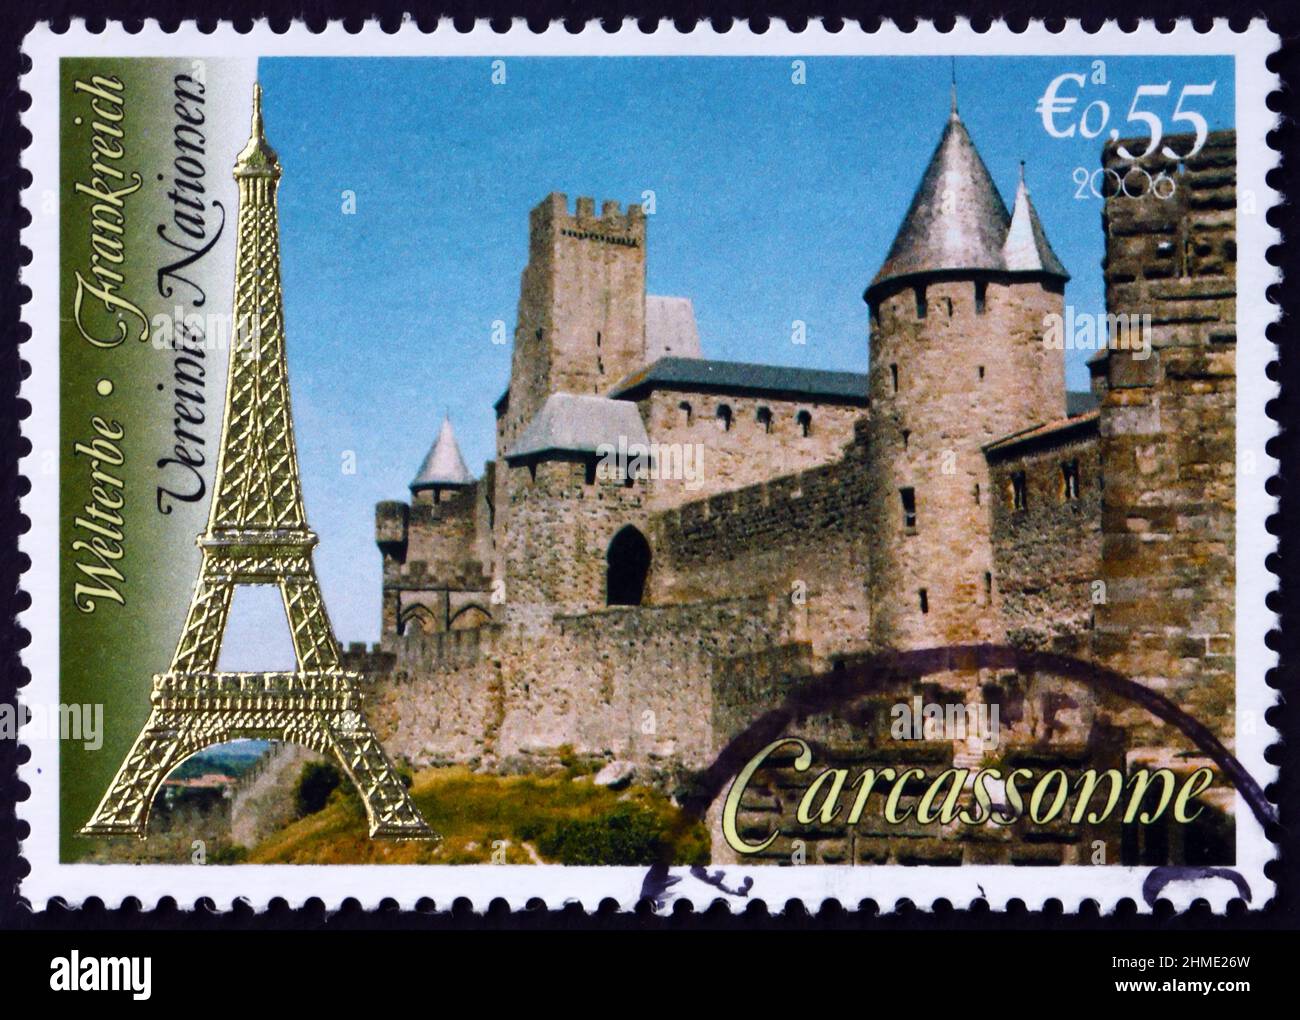 UNITED NATIONS - CIRCA 2006: a stamp printed in the United Nations, offices in Vienna shows Eiffel Tower and Carcassonne, World Heritage Site, circa 2 Stock Photo